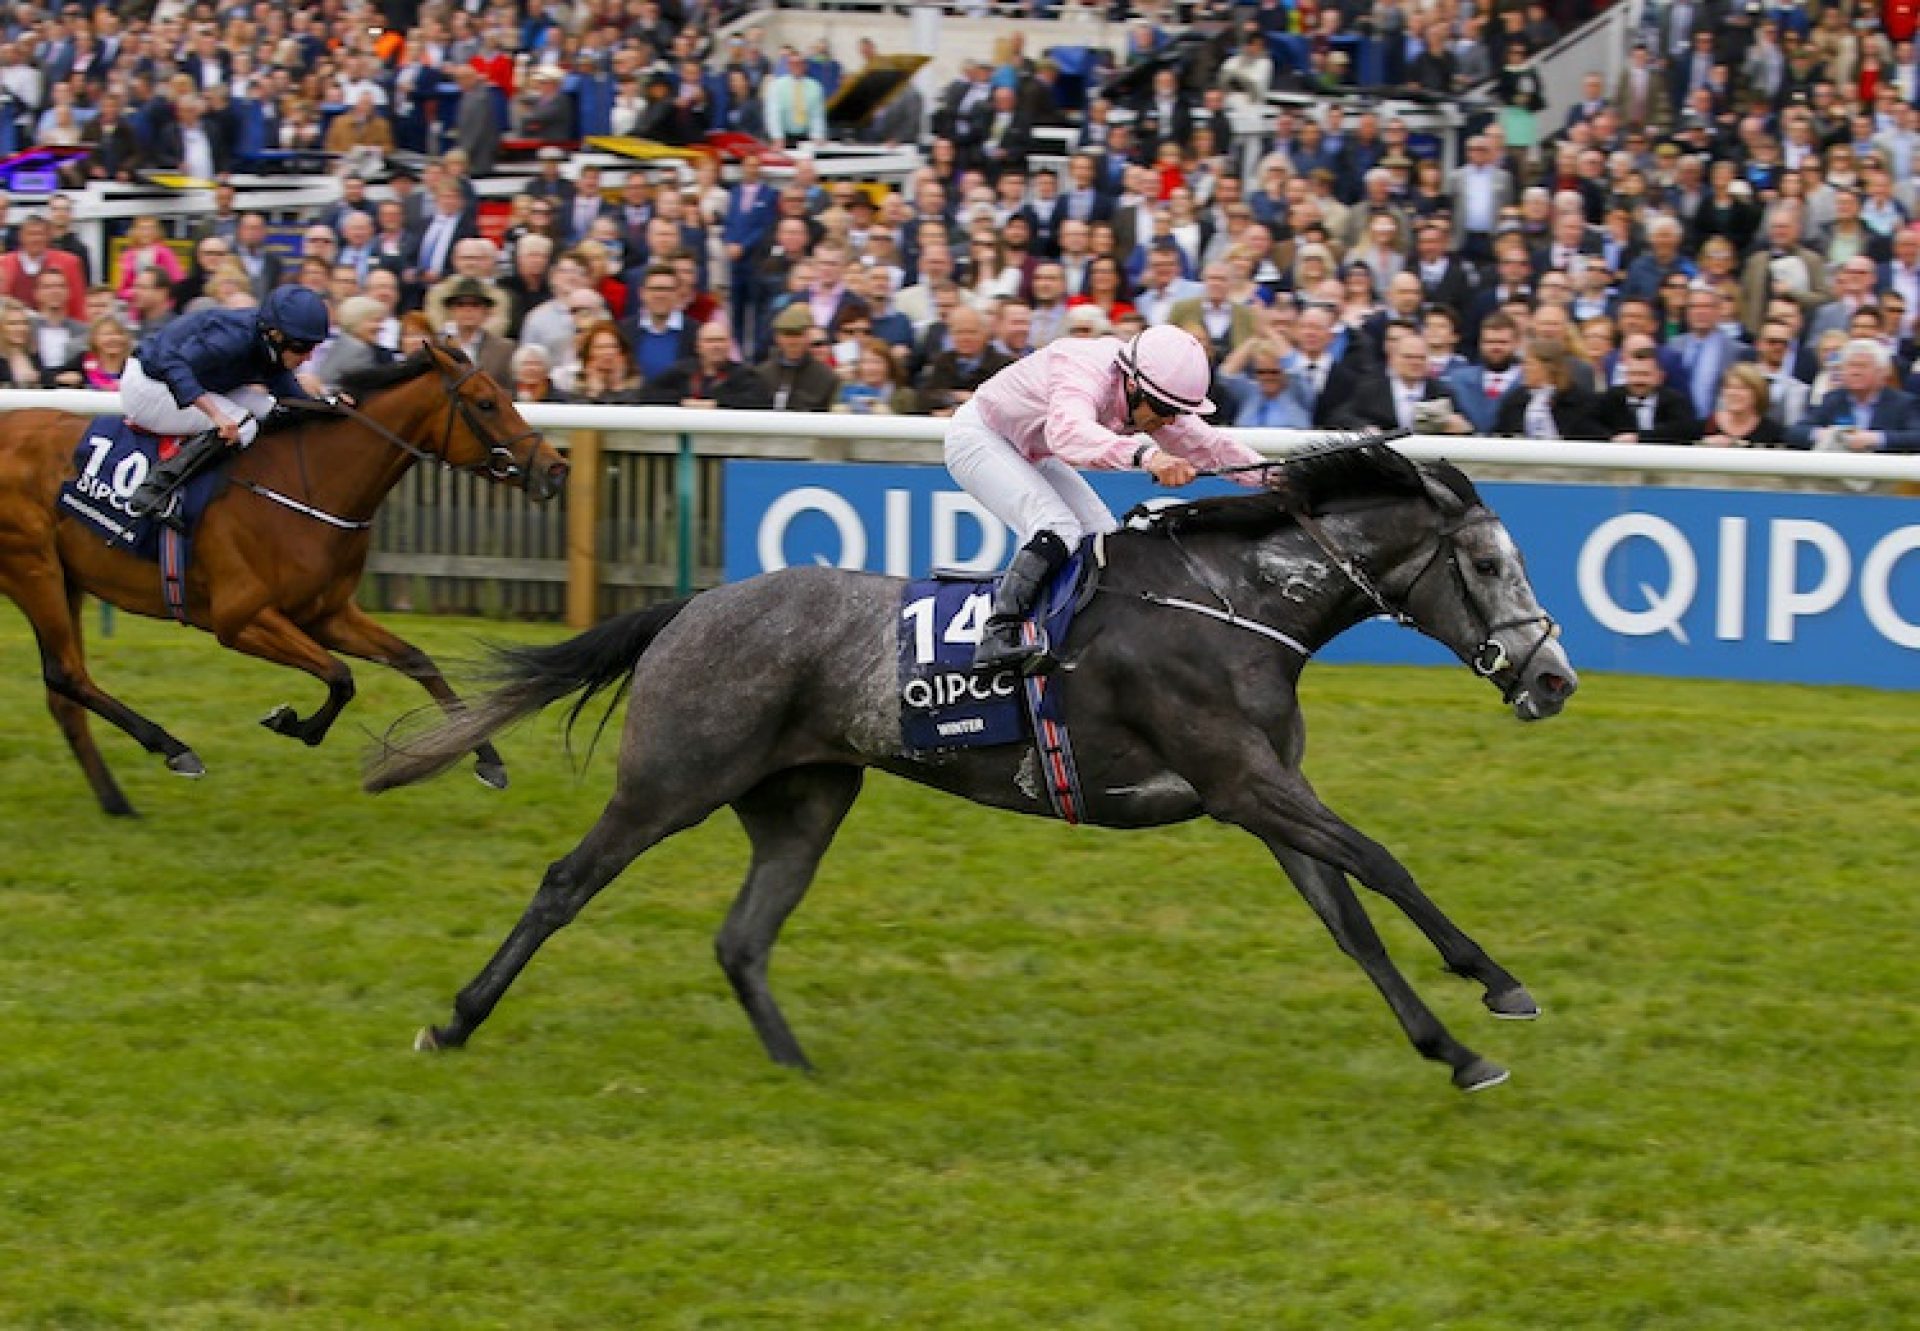 Winter (Galileo) winning the 1,000 Guineas (Gr.1) at Newmarket